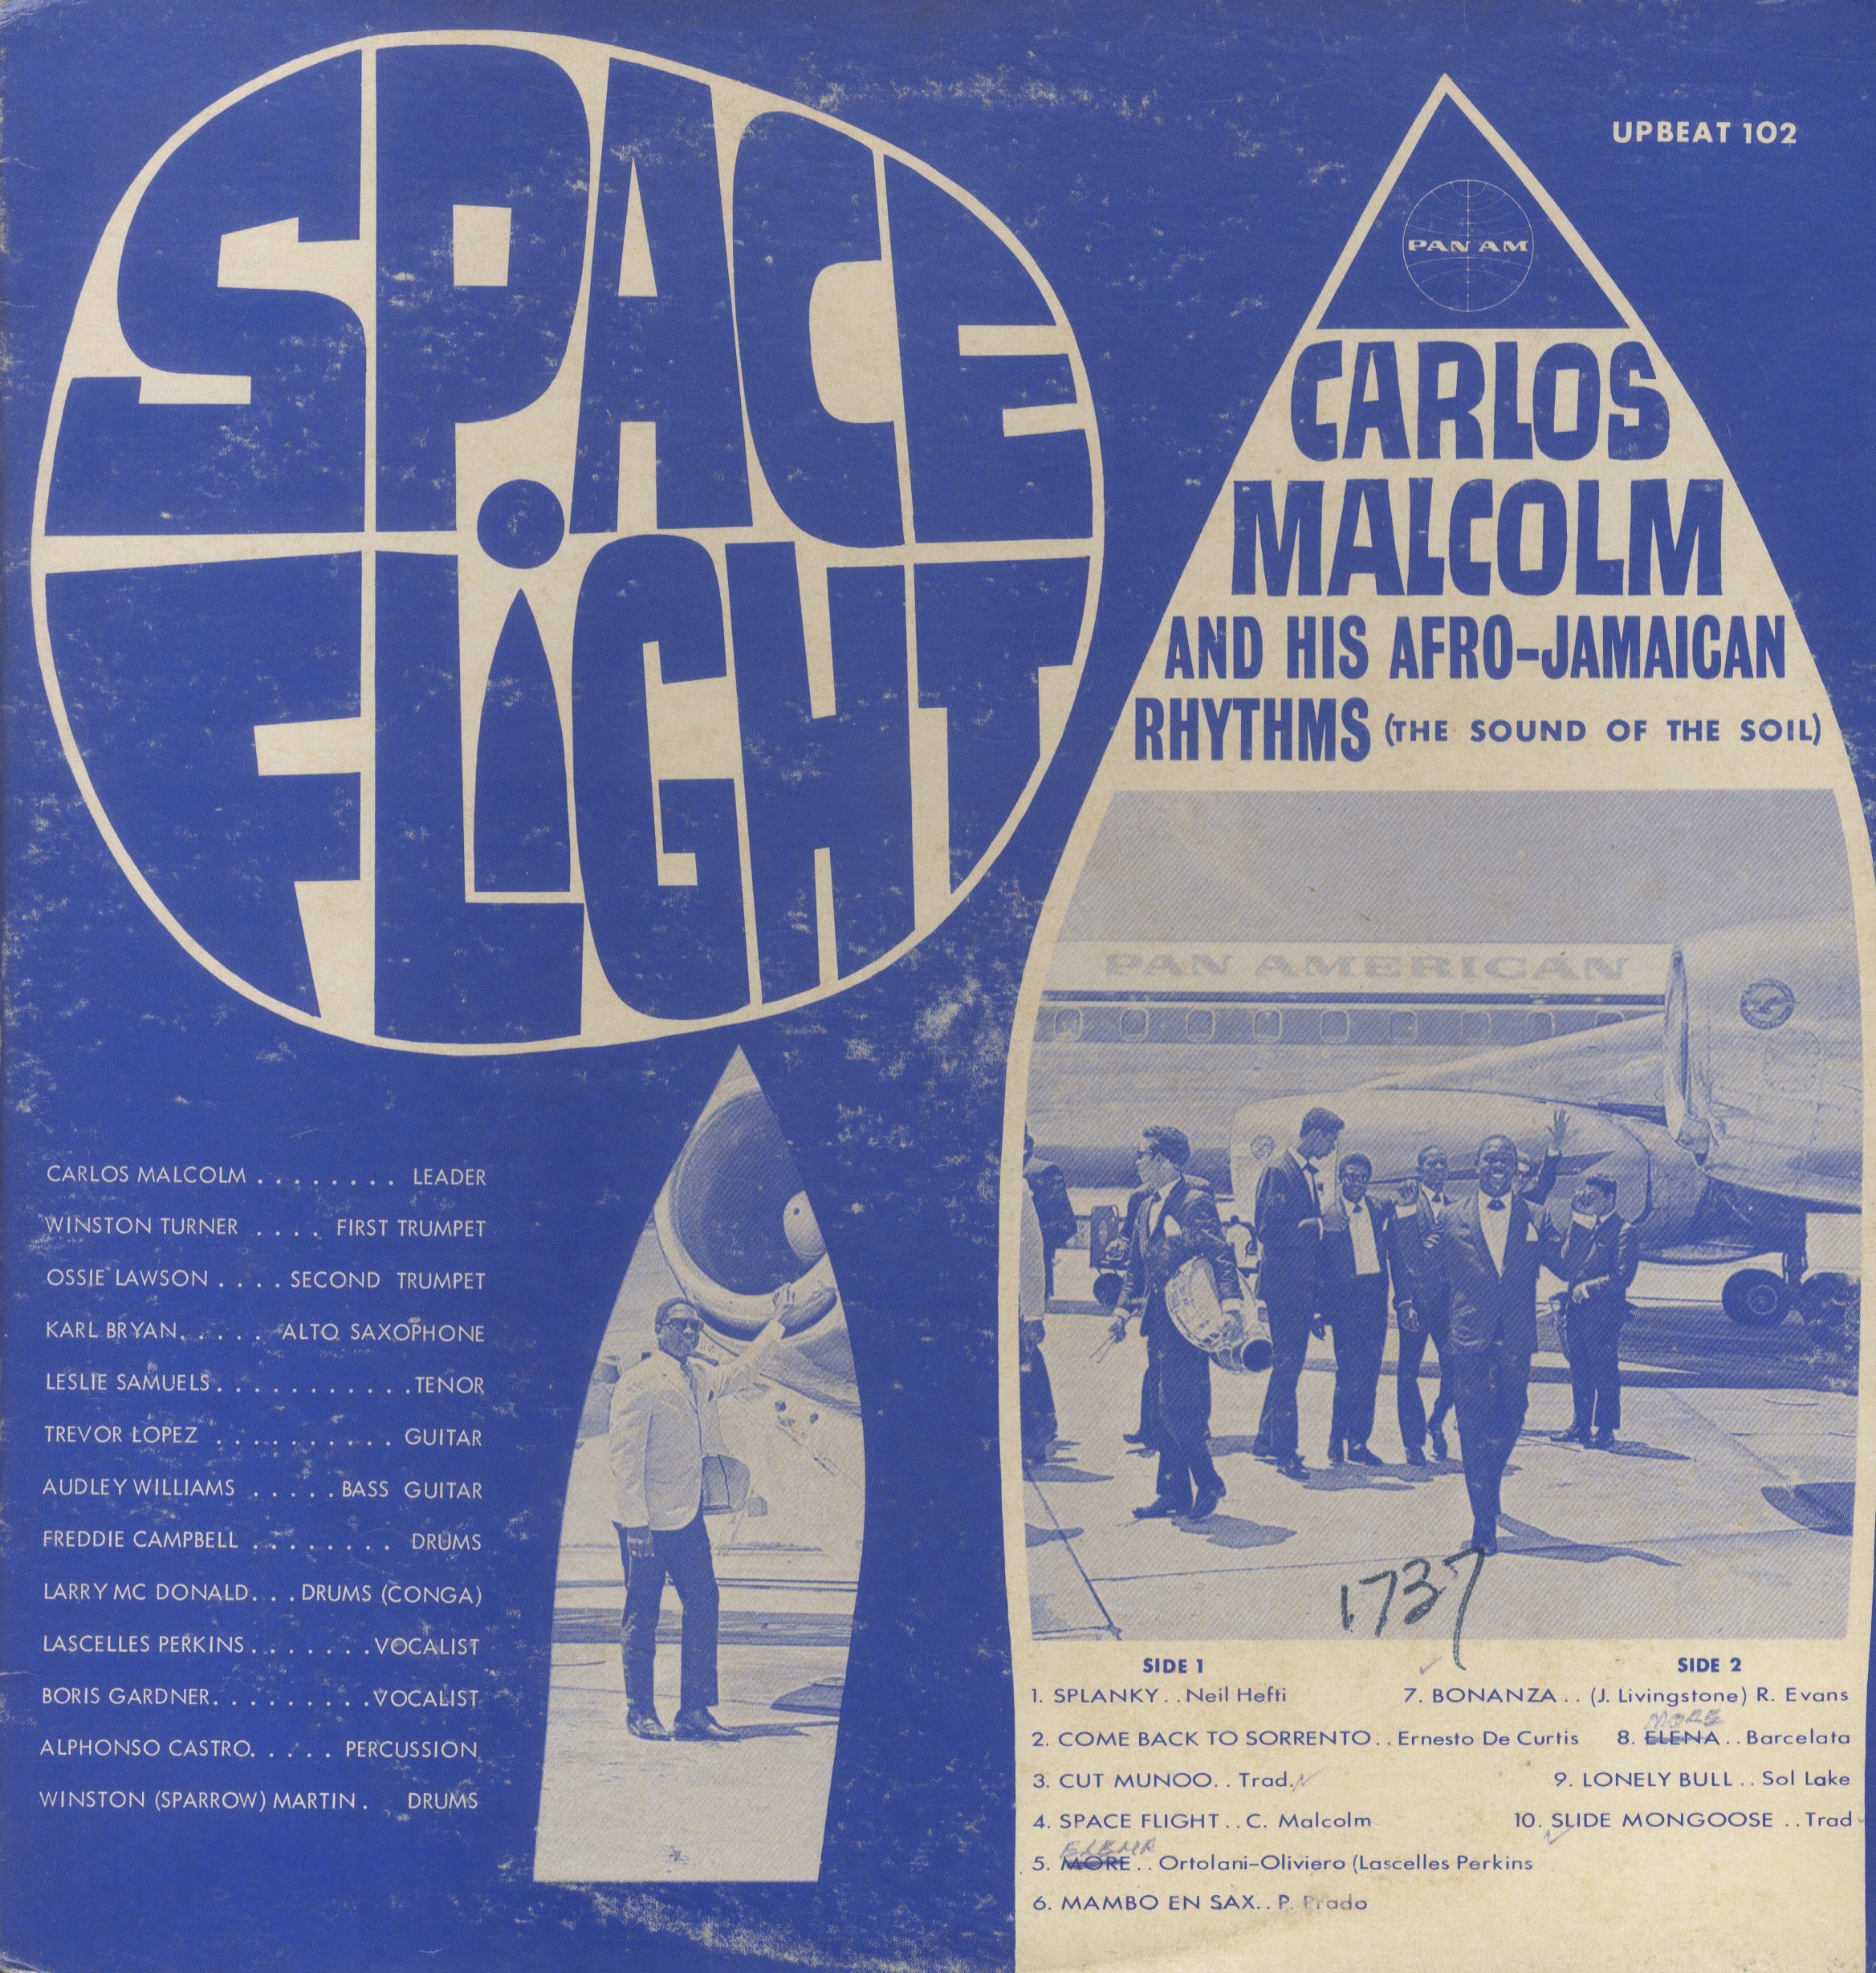 CALROS MALCOM AND HIS AFRO RYTHEMS [Space Flight]